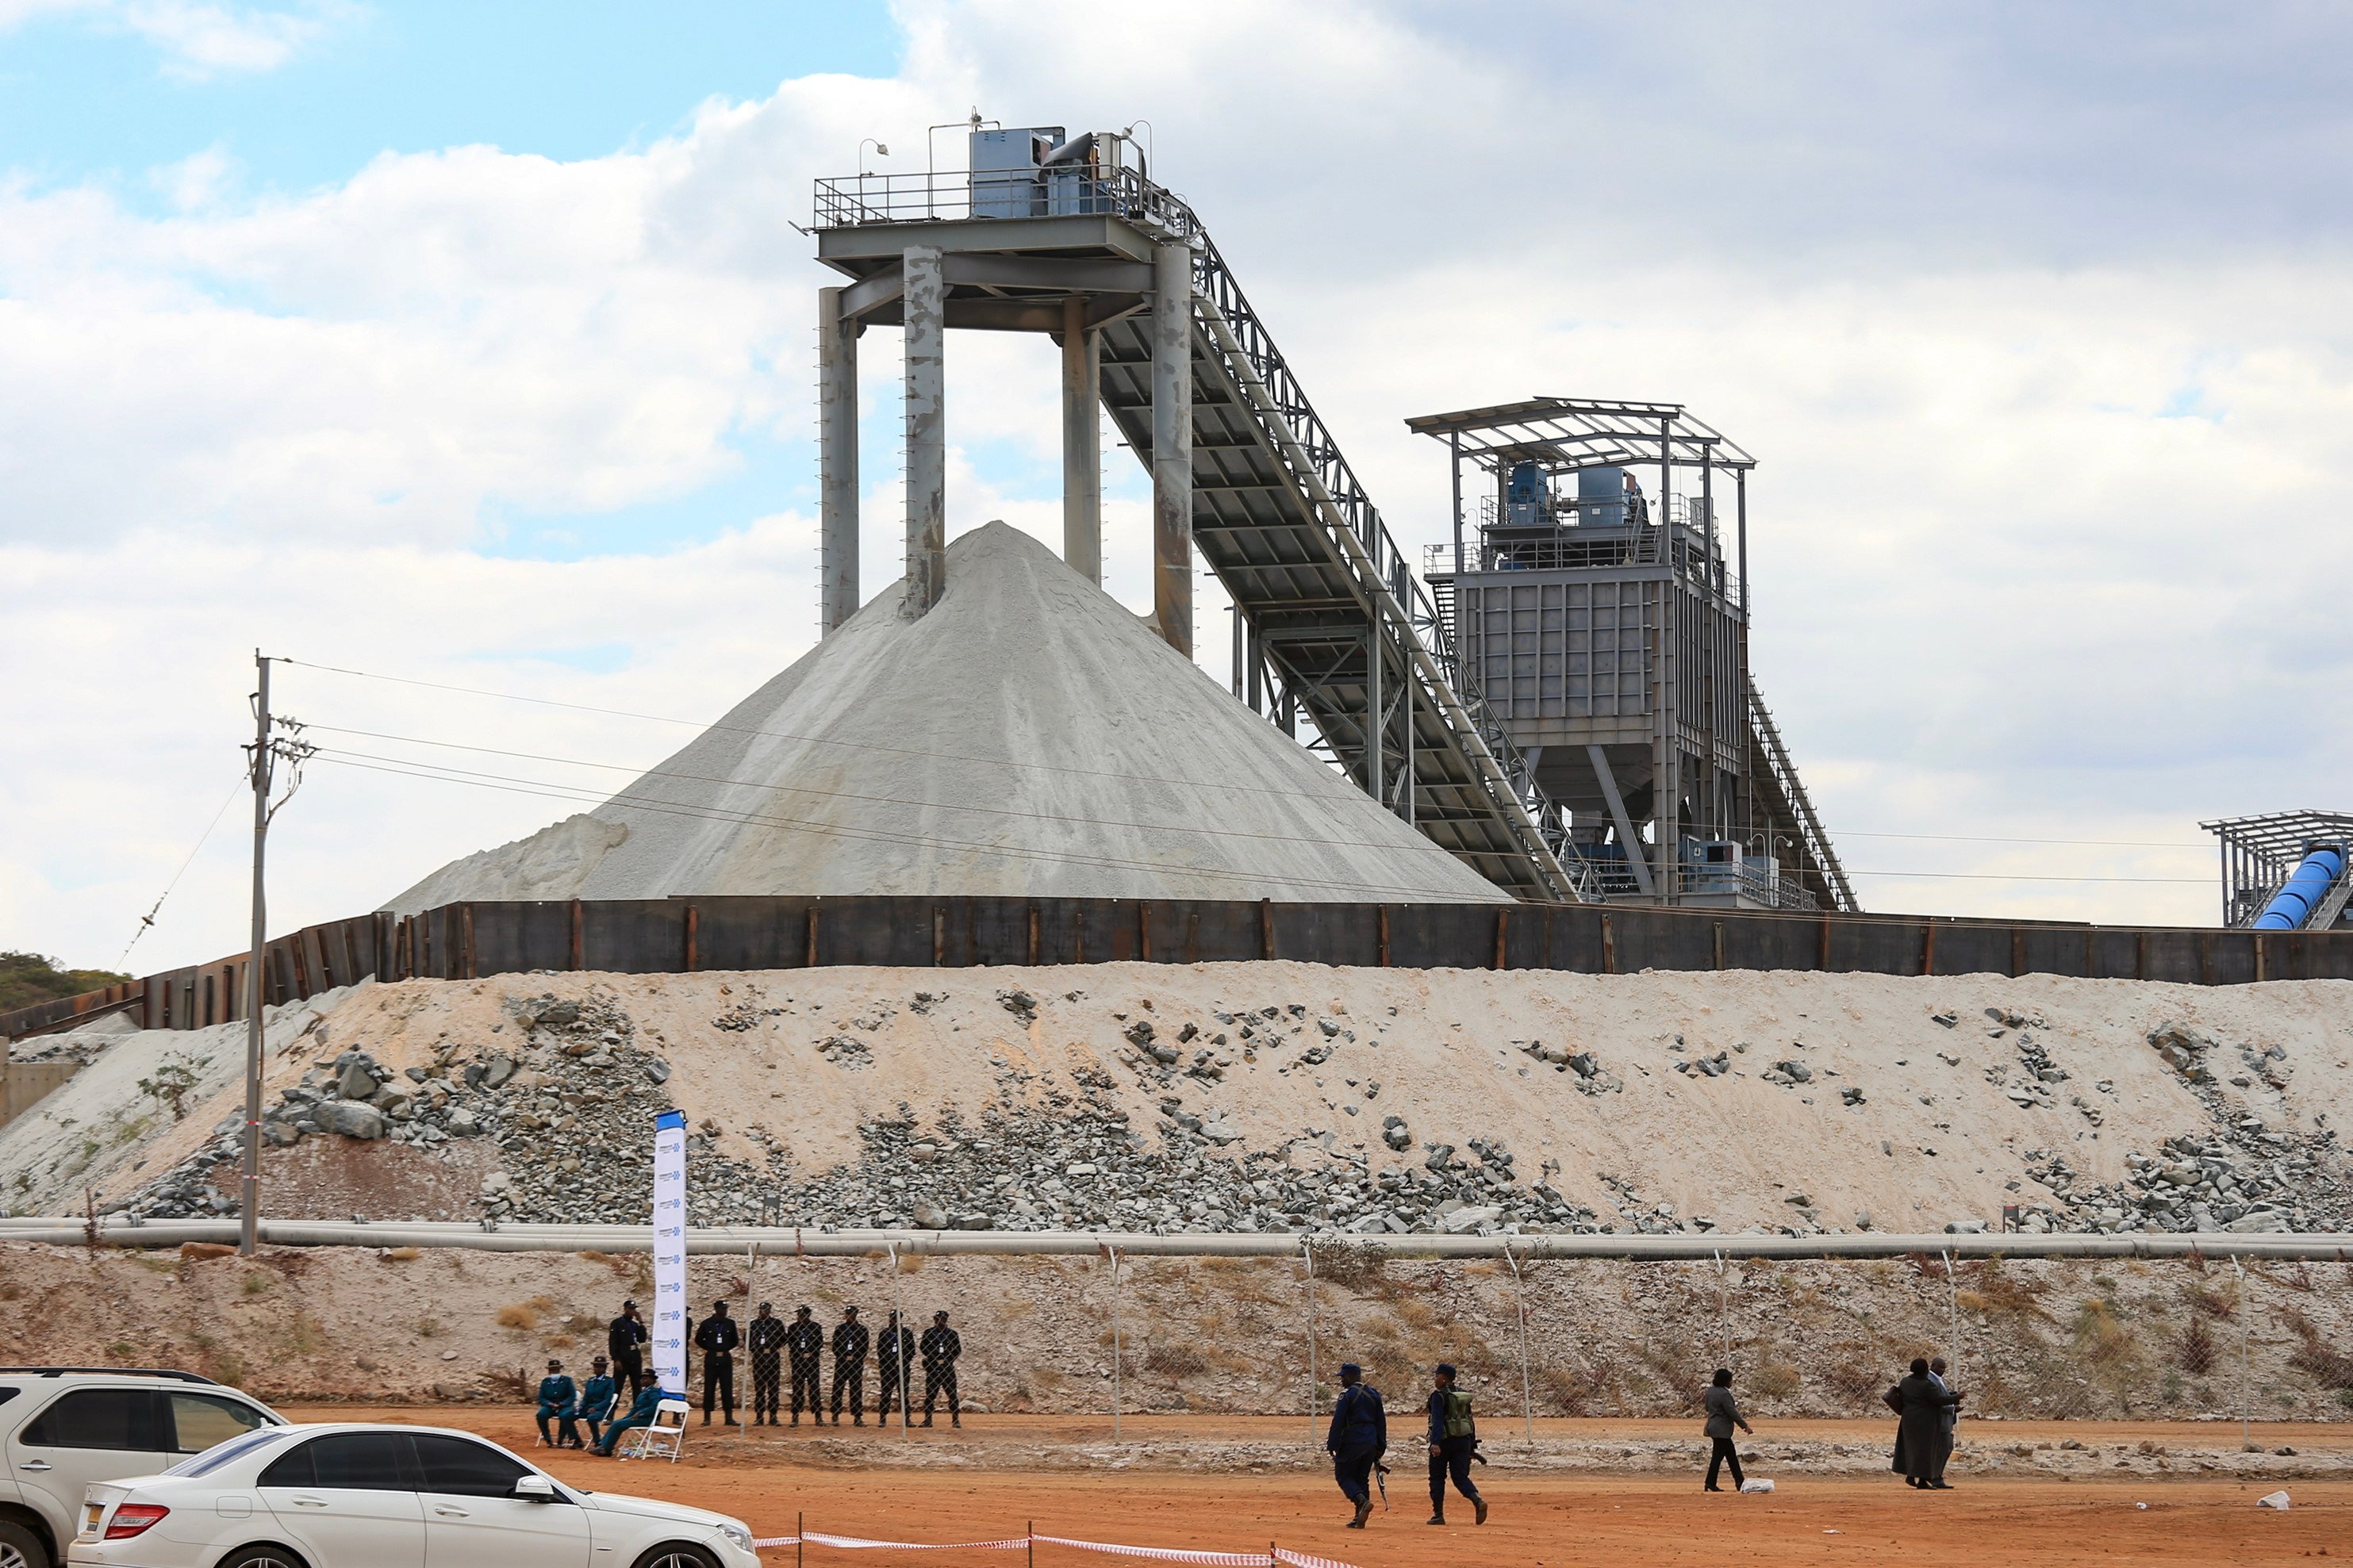 Investments in mining in Africa are an important focus of the scheme. Photo: EPA-EFE